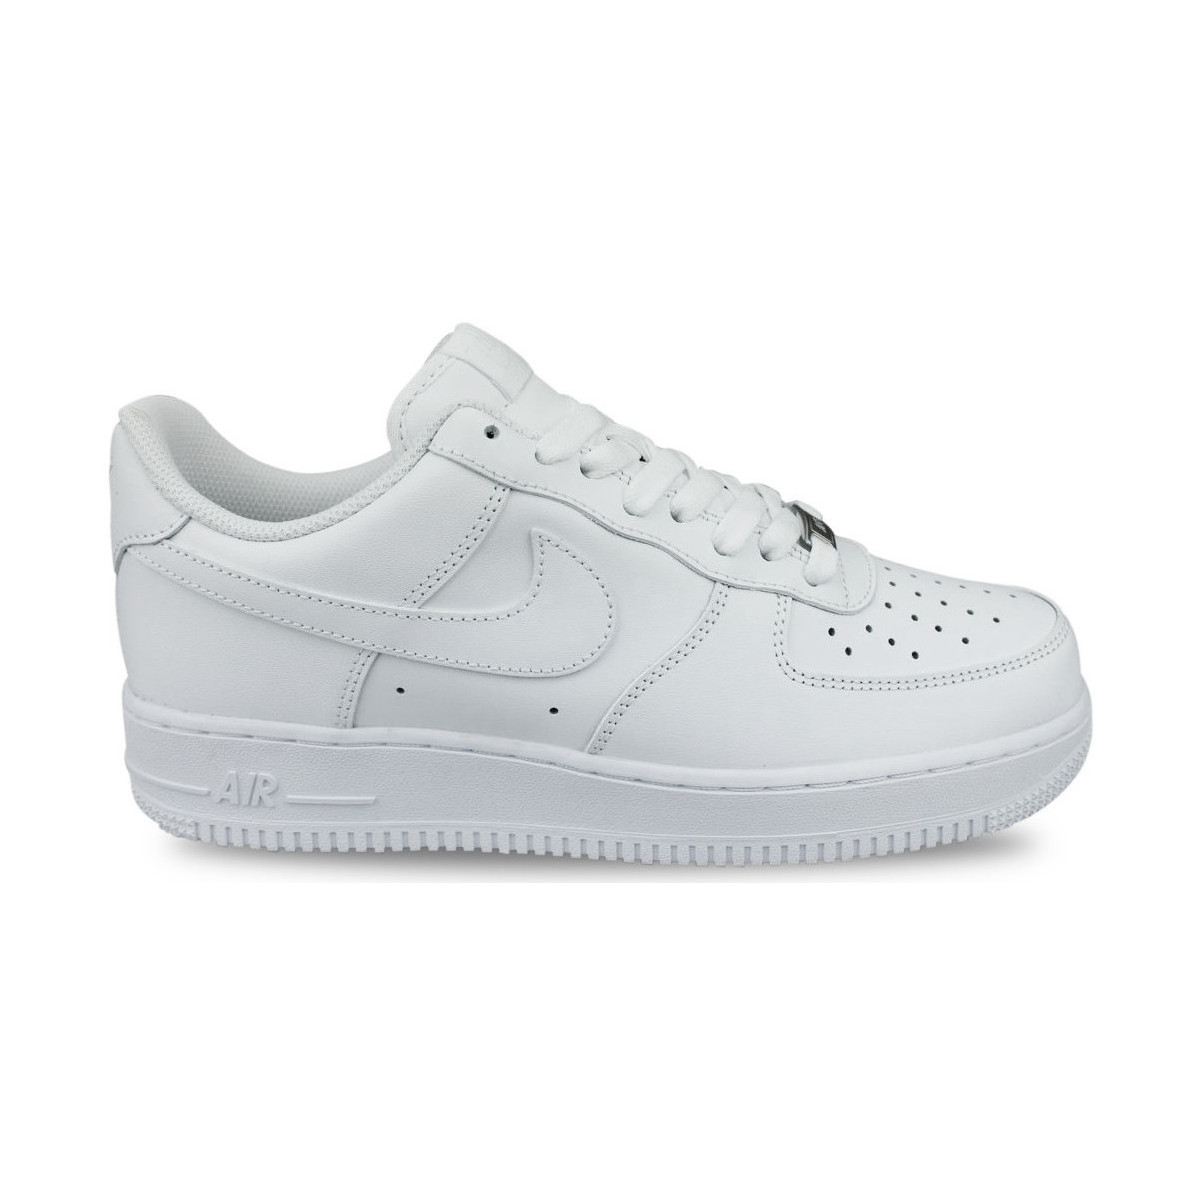 Chaussures Homme shox nike air force max barkley black and white Air Force 1 Low '07 Blanc Blanc